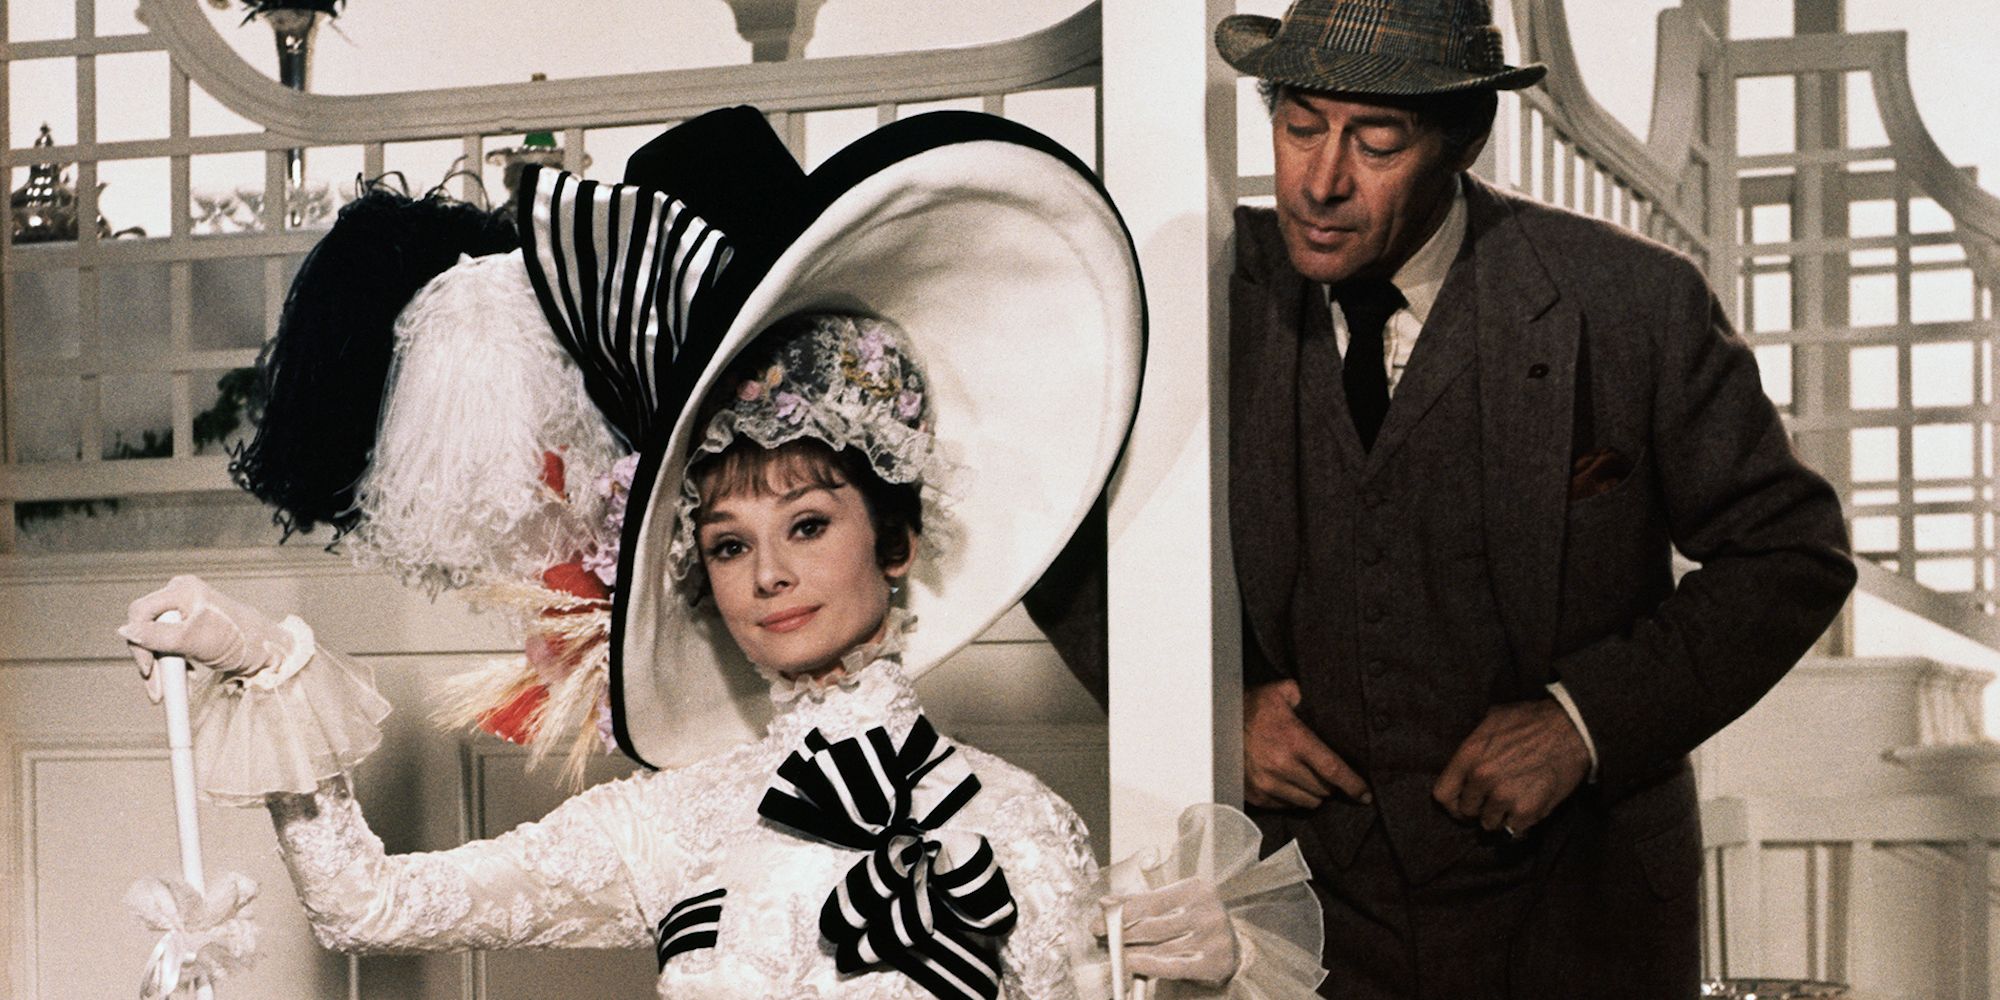 Professor Higging standing behind Eliza, who's sitting on a chair, in My Fair Lady